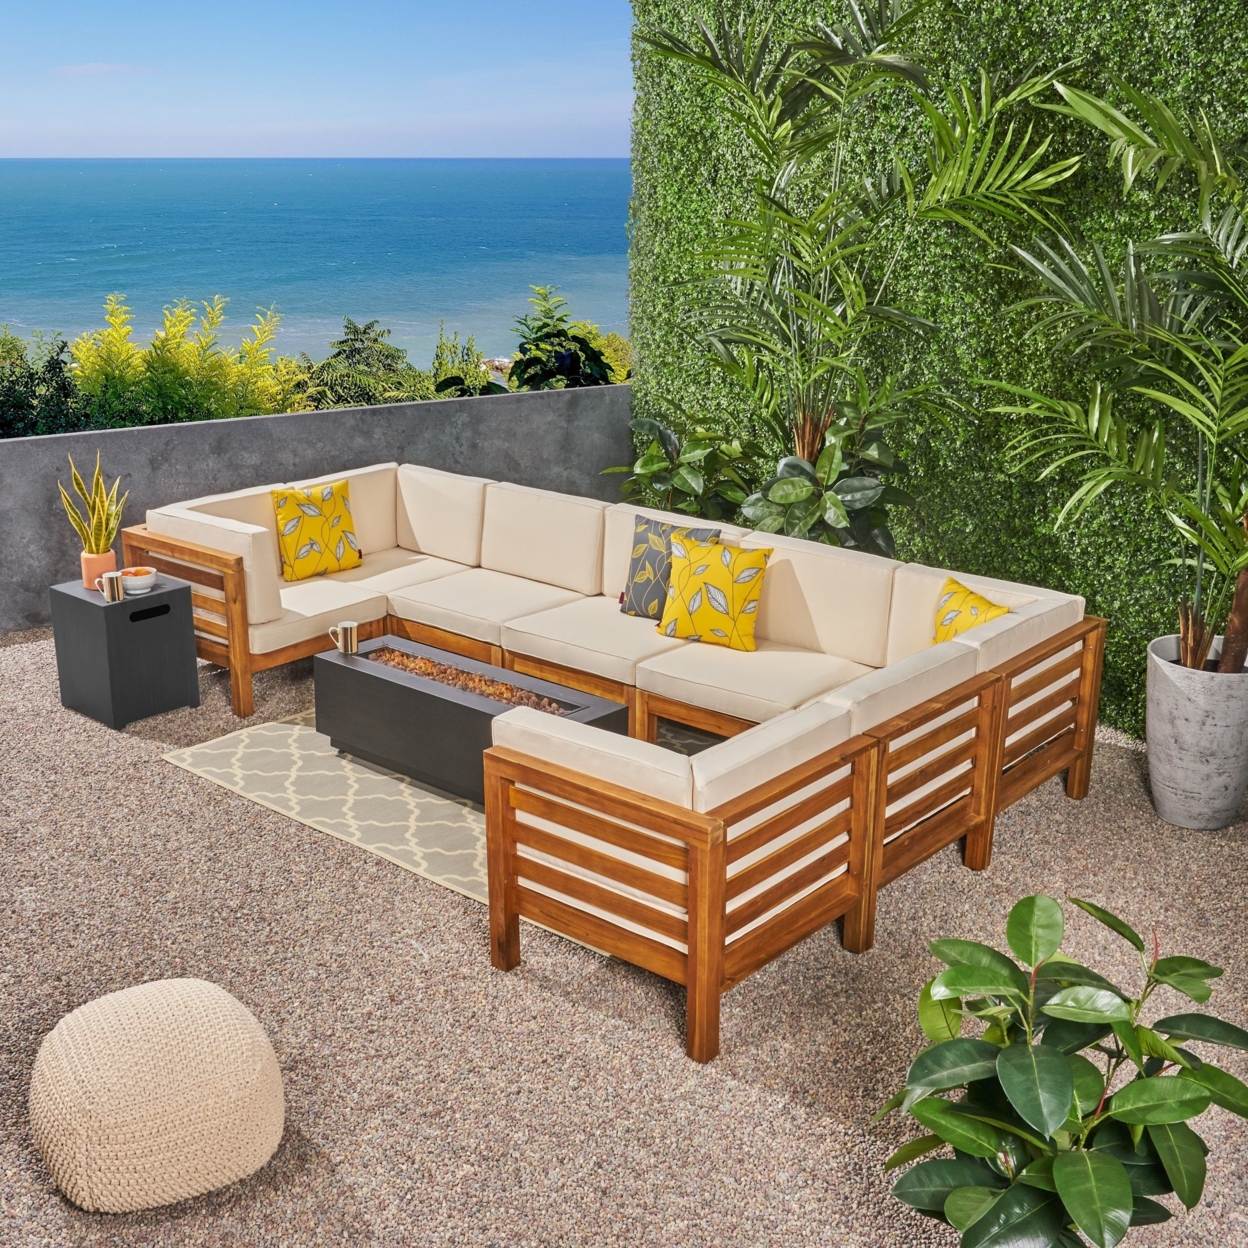 Krystin Outdoor U-Shaped Sectional Sofa Set With Fire Pit - Gray / Dark Gray